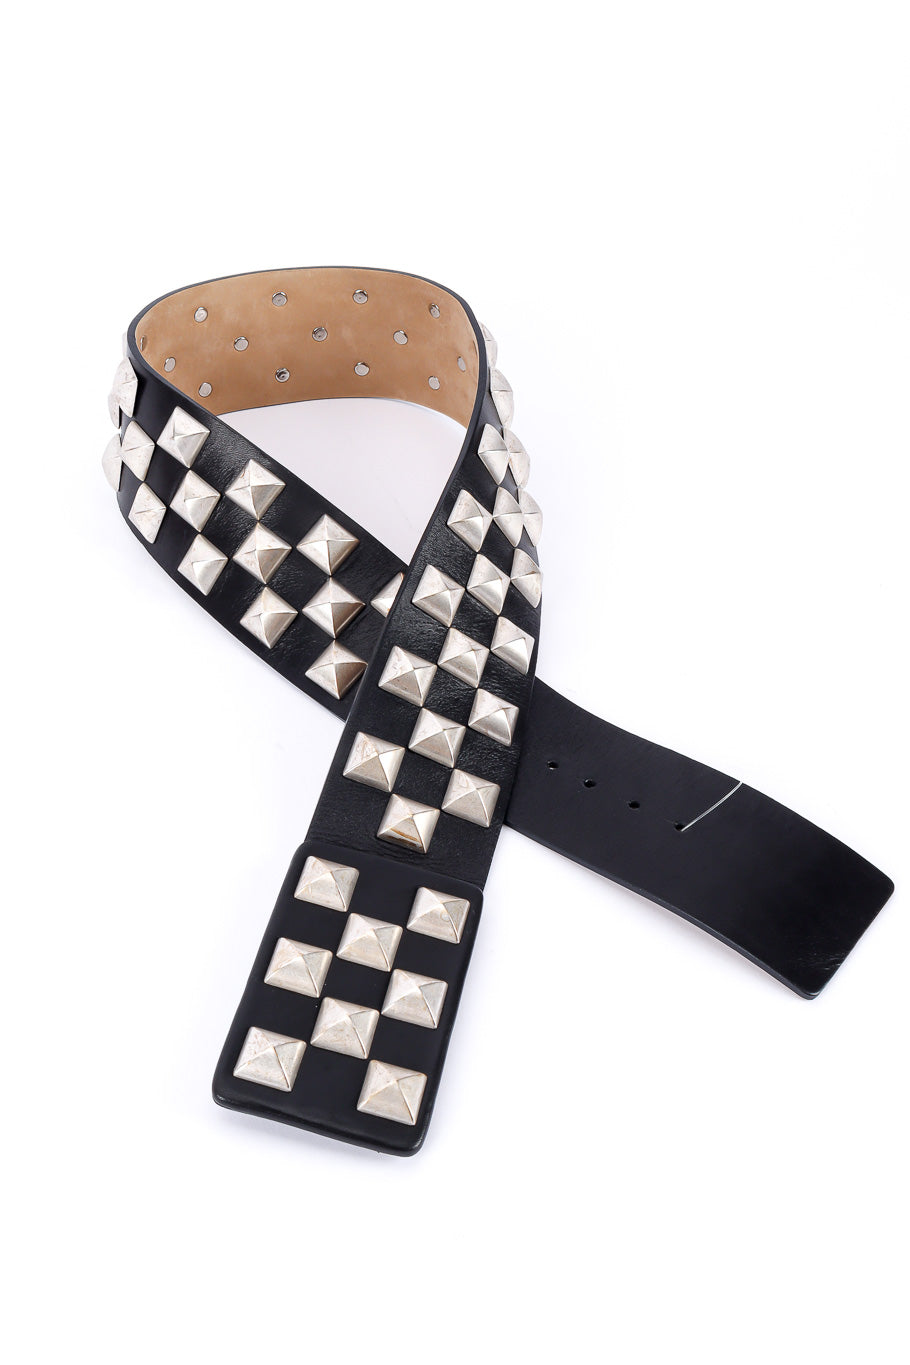 Studded leather statement belt by Streets Ahead looped flat lay @recessla